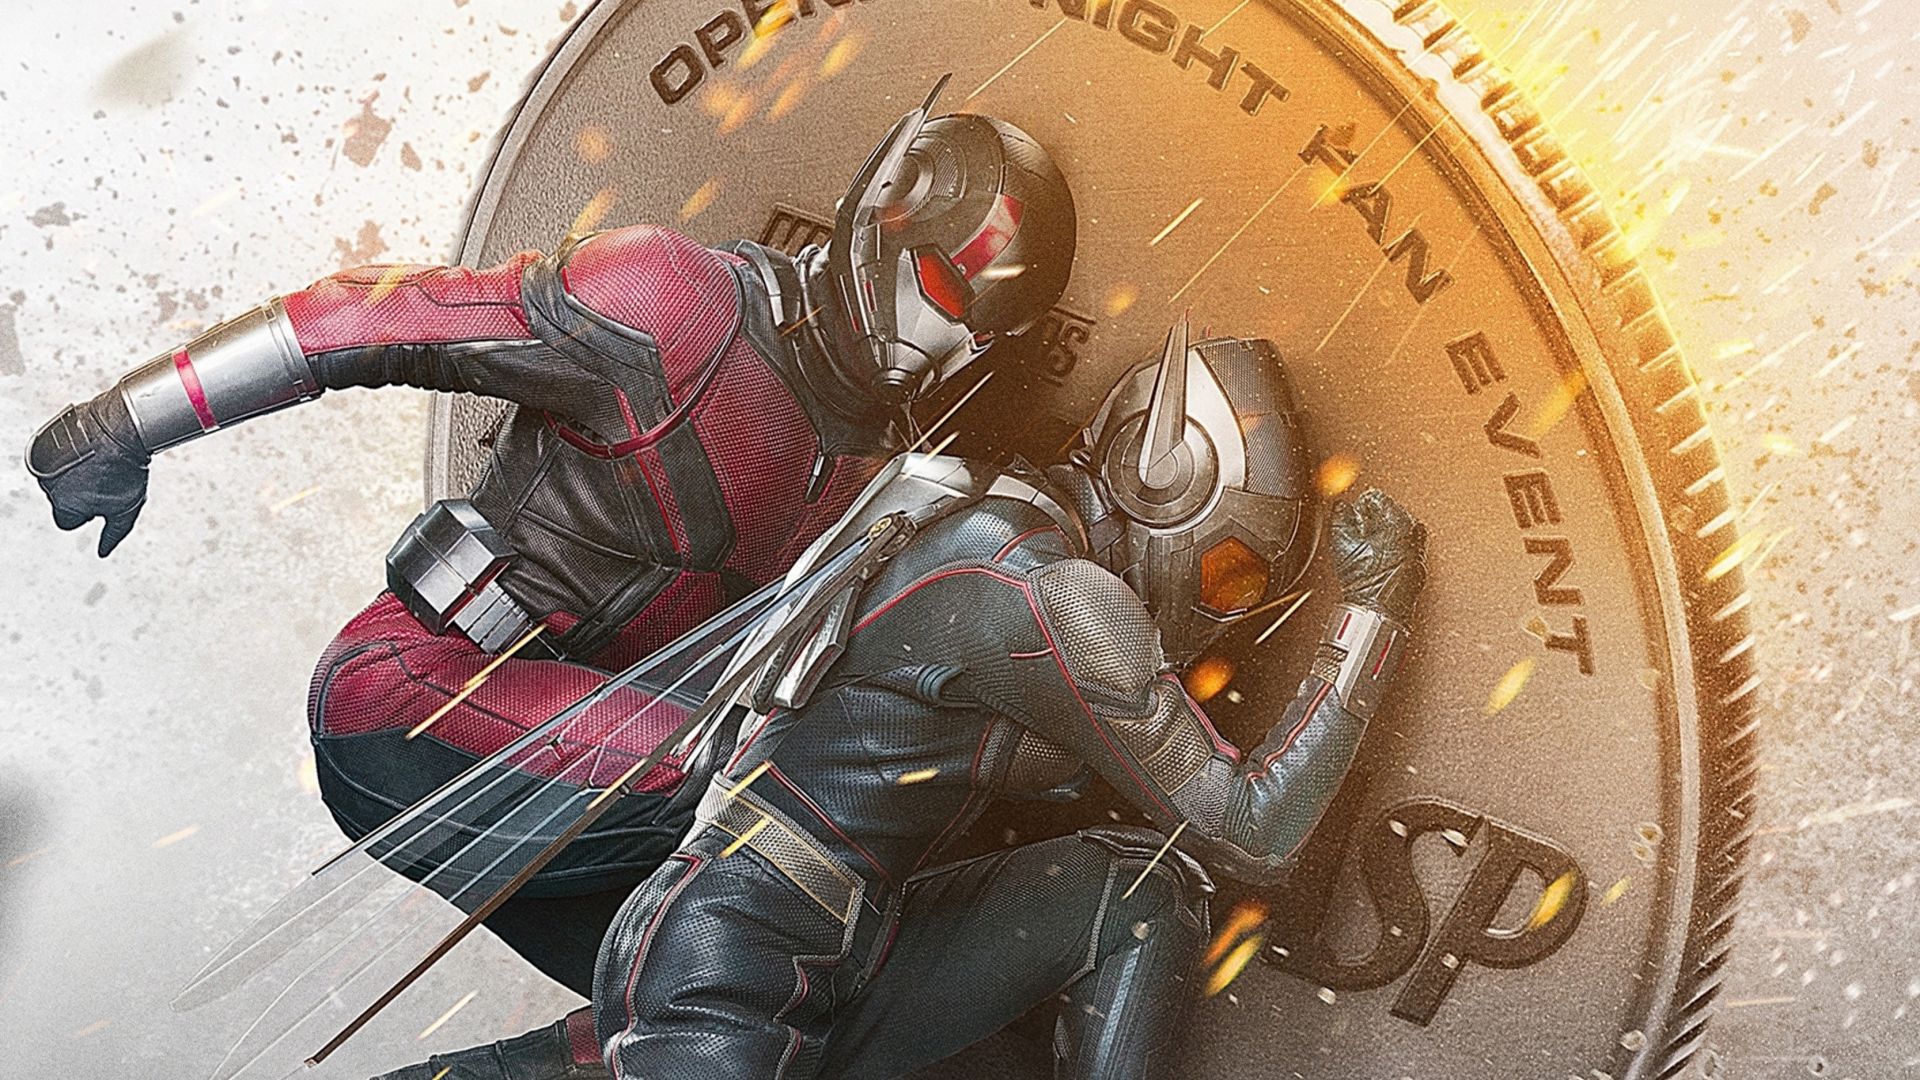 Desktop Wallpaper Ant Man And The Wasp, Behind Coin, Action Movie, HD Image, Picture, Background, Aa5edc